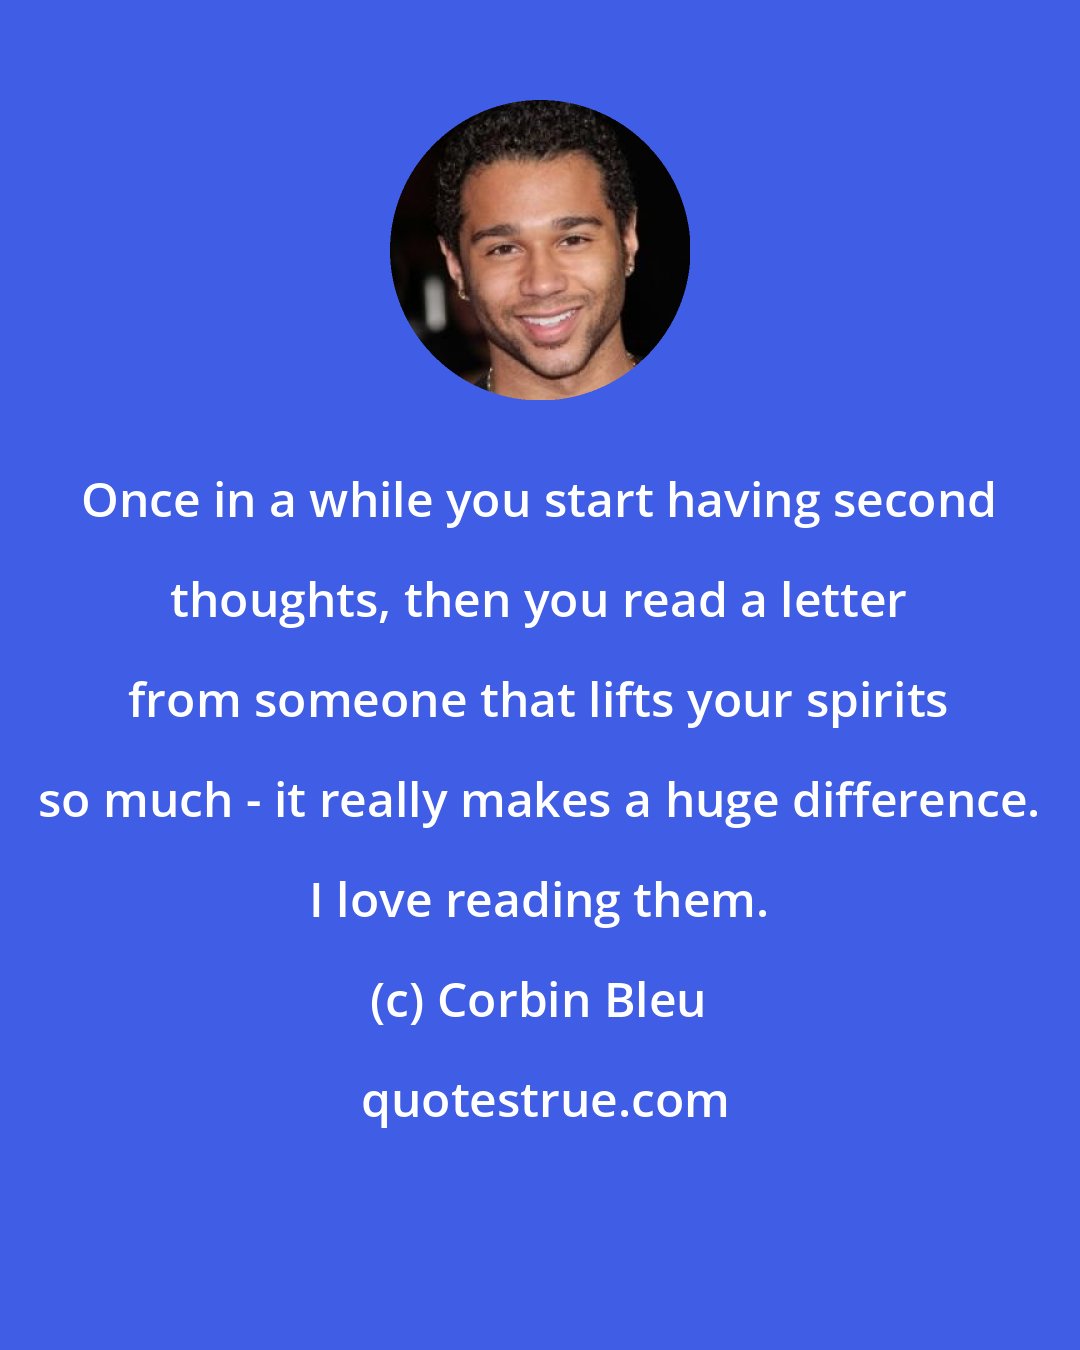 Corbin Bleu: Once in a while you start having second thoughts, then you read a letter from someone that lifts your spirits so much - it really makes a huge difference. I love reading them.